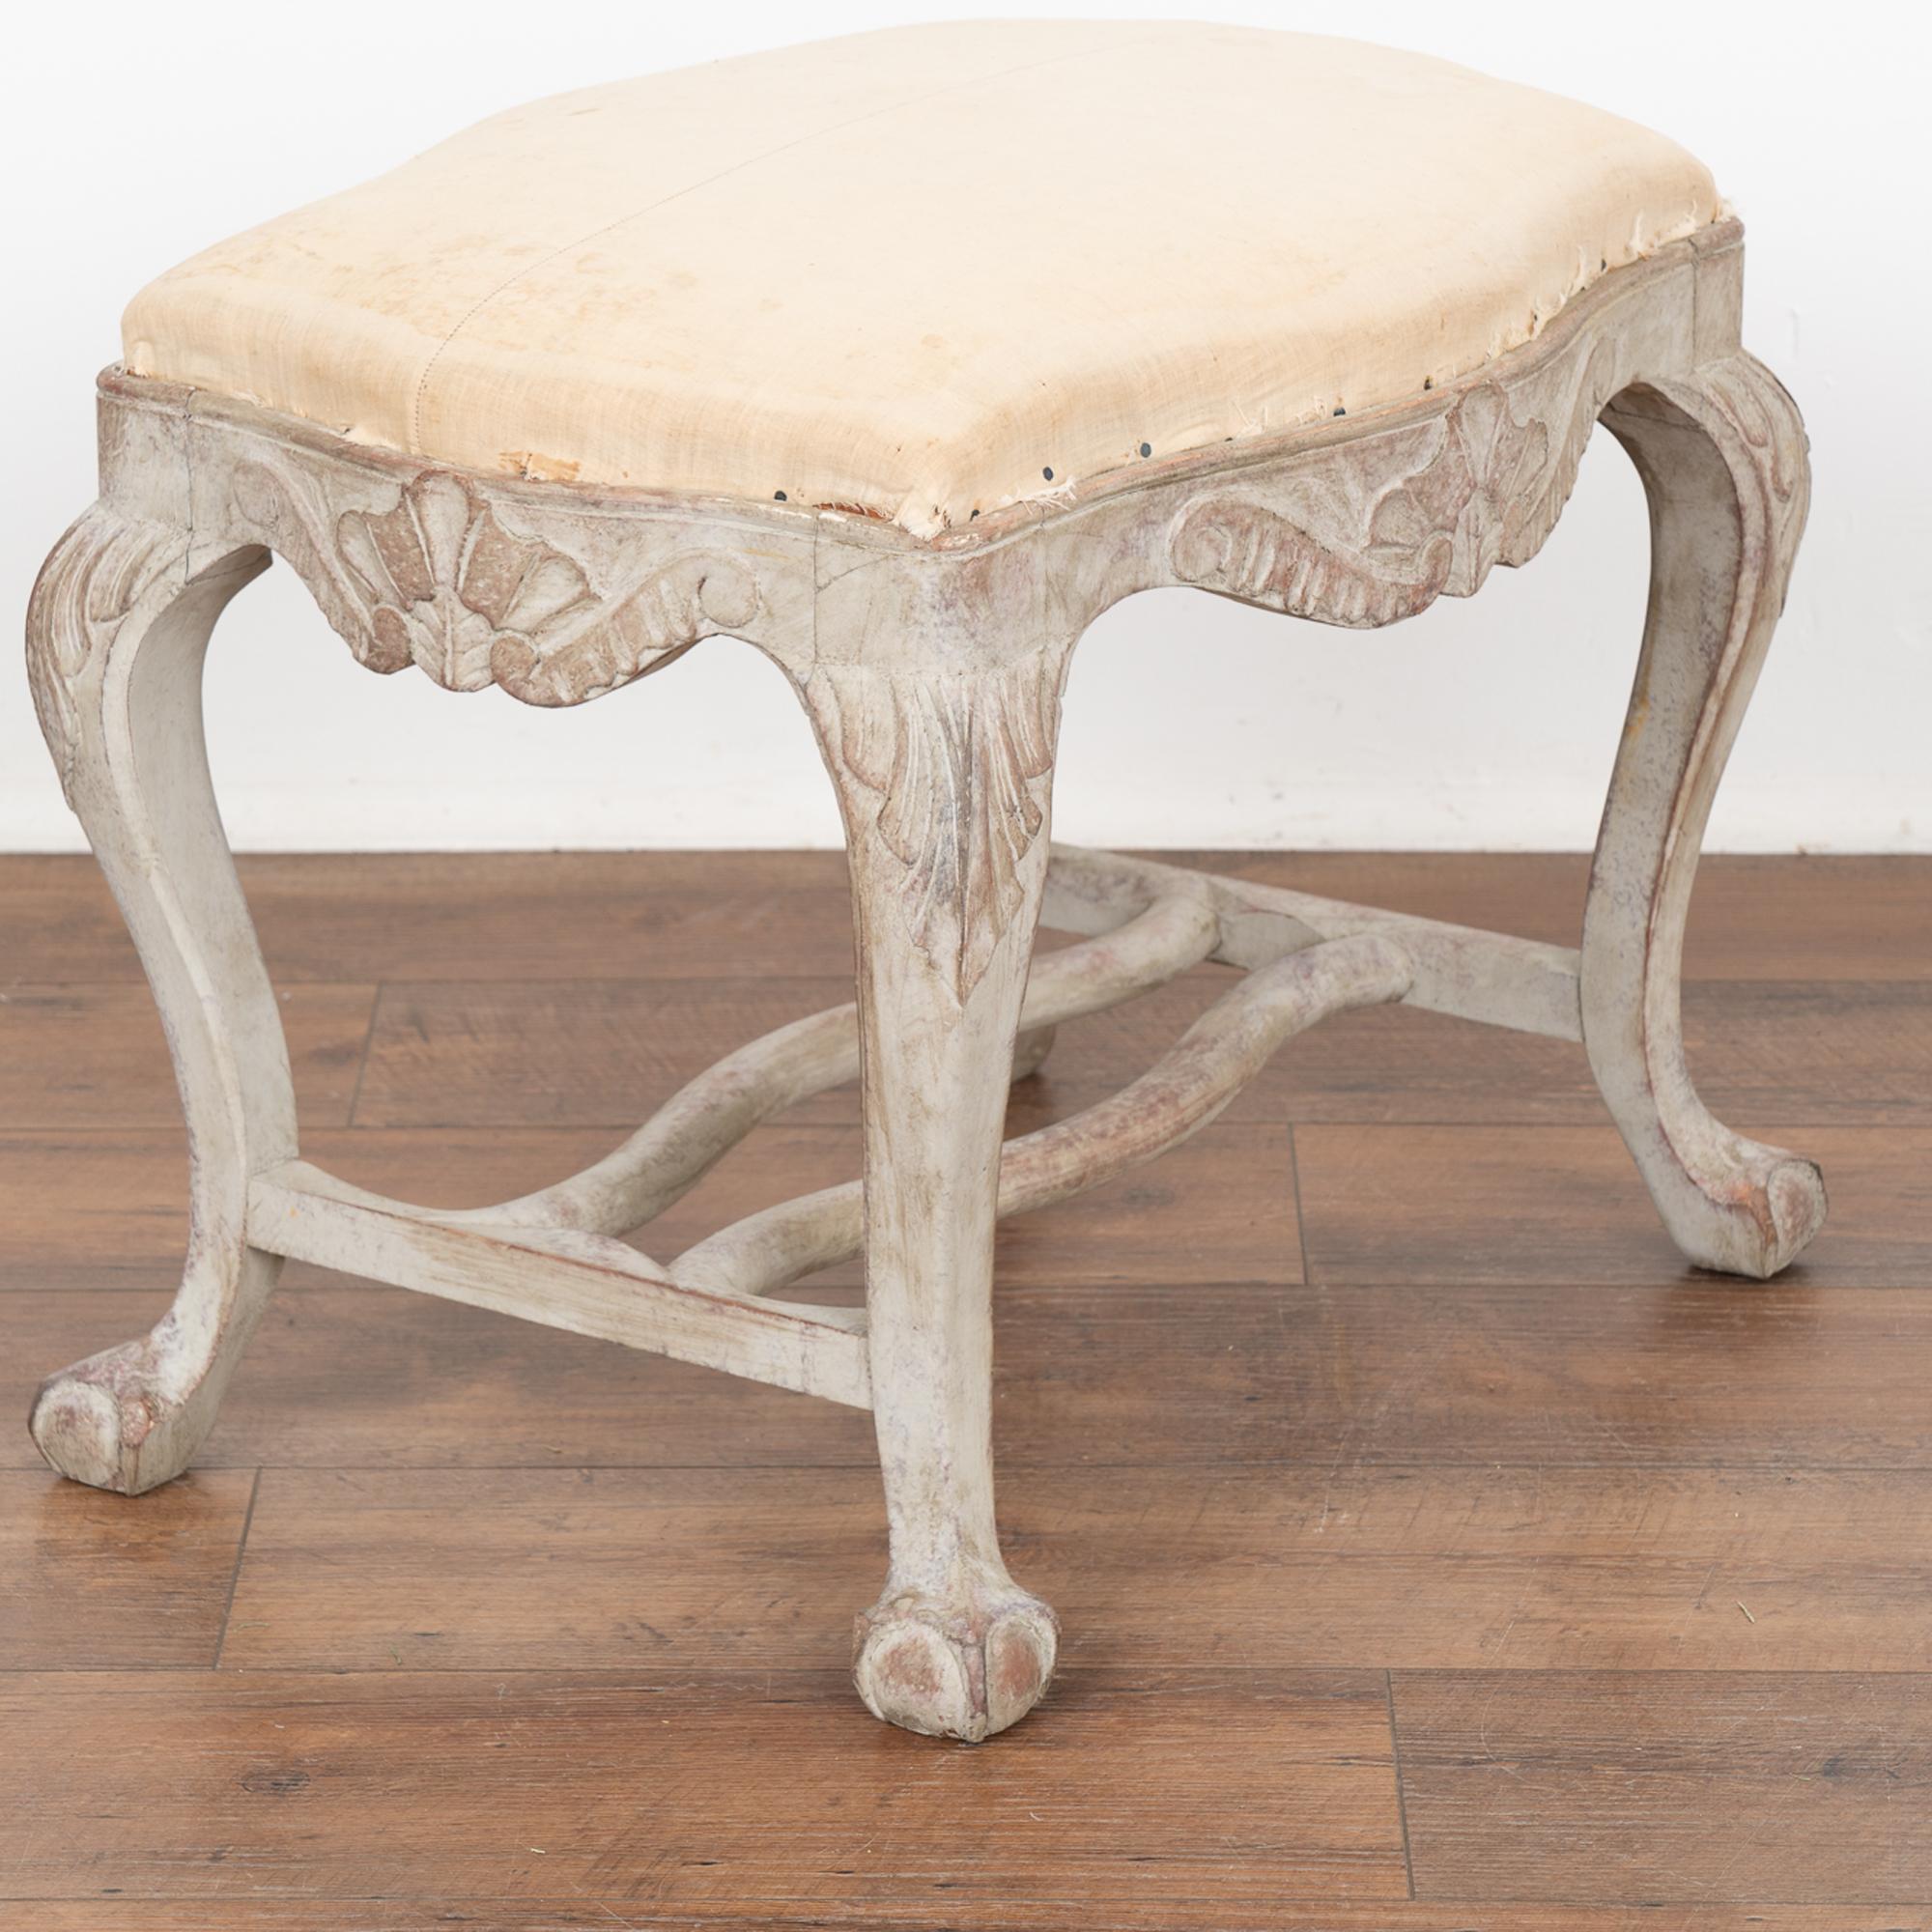 This Swedish stool or tabouret has curved cabriolet legs with ball and claw feet and carving along the skirt and legs which adds an elegant touch.
Restored, solid/stable and ready to be enjoyed. Later professionally painted in layered shades of gray